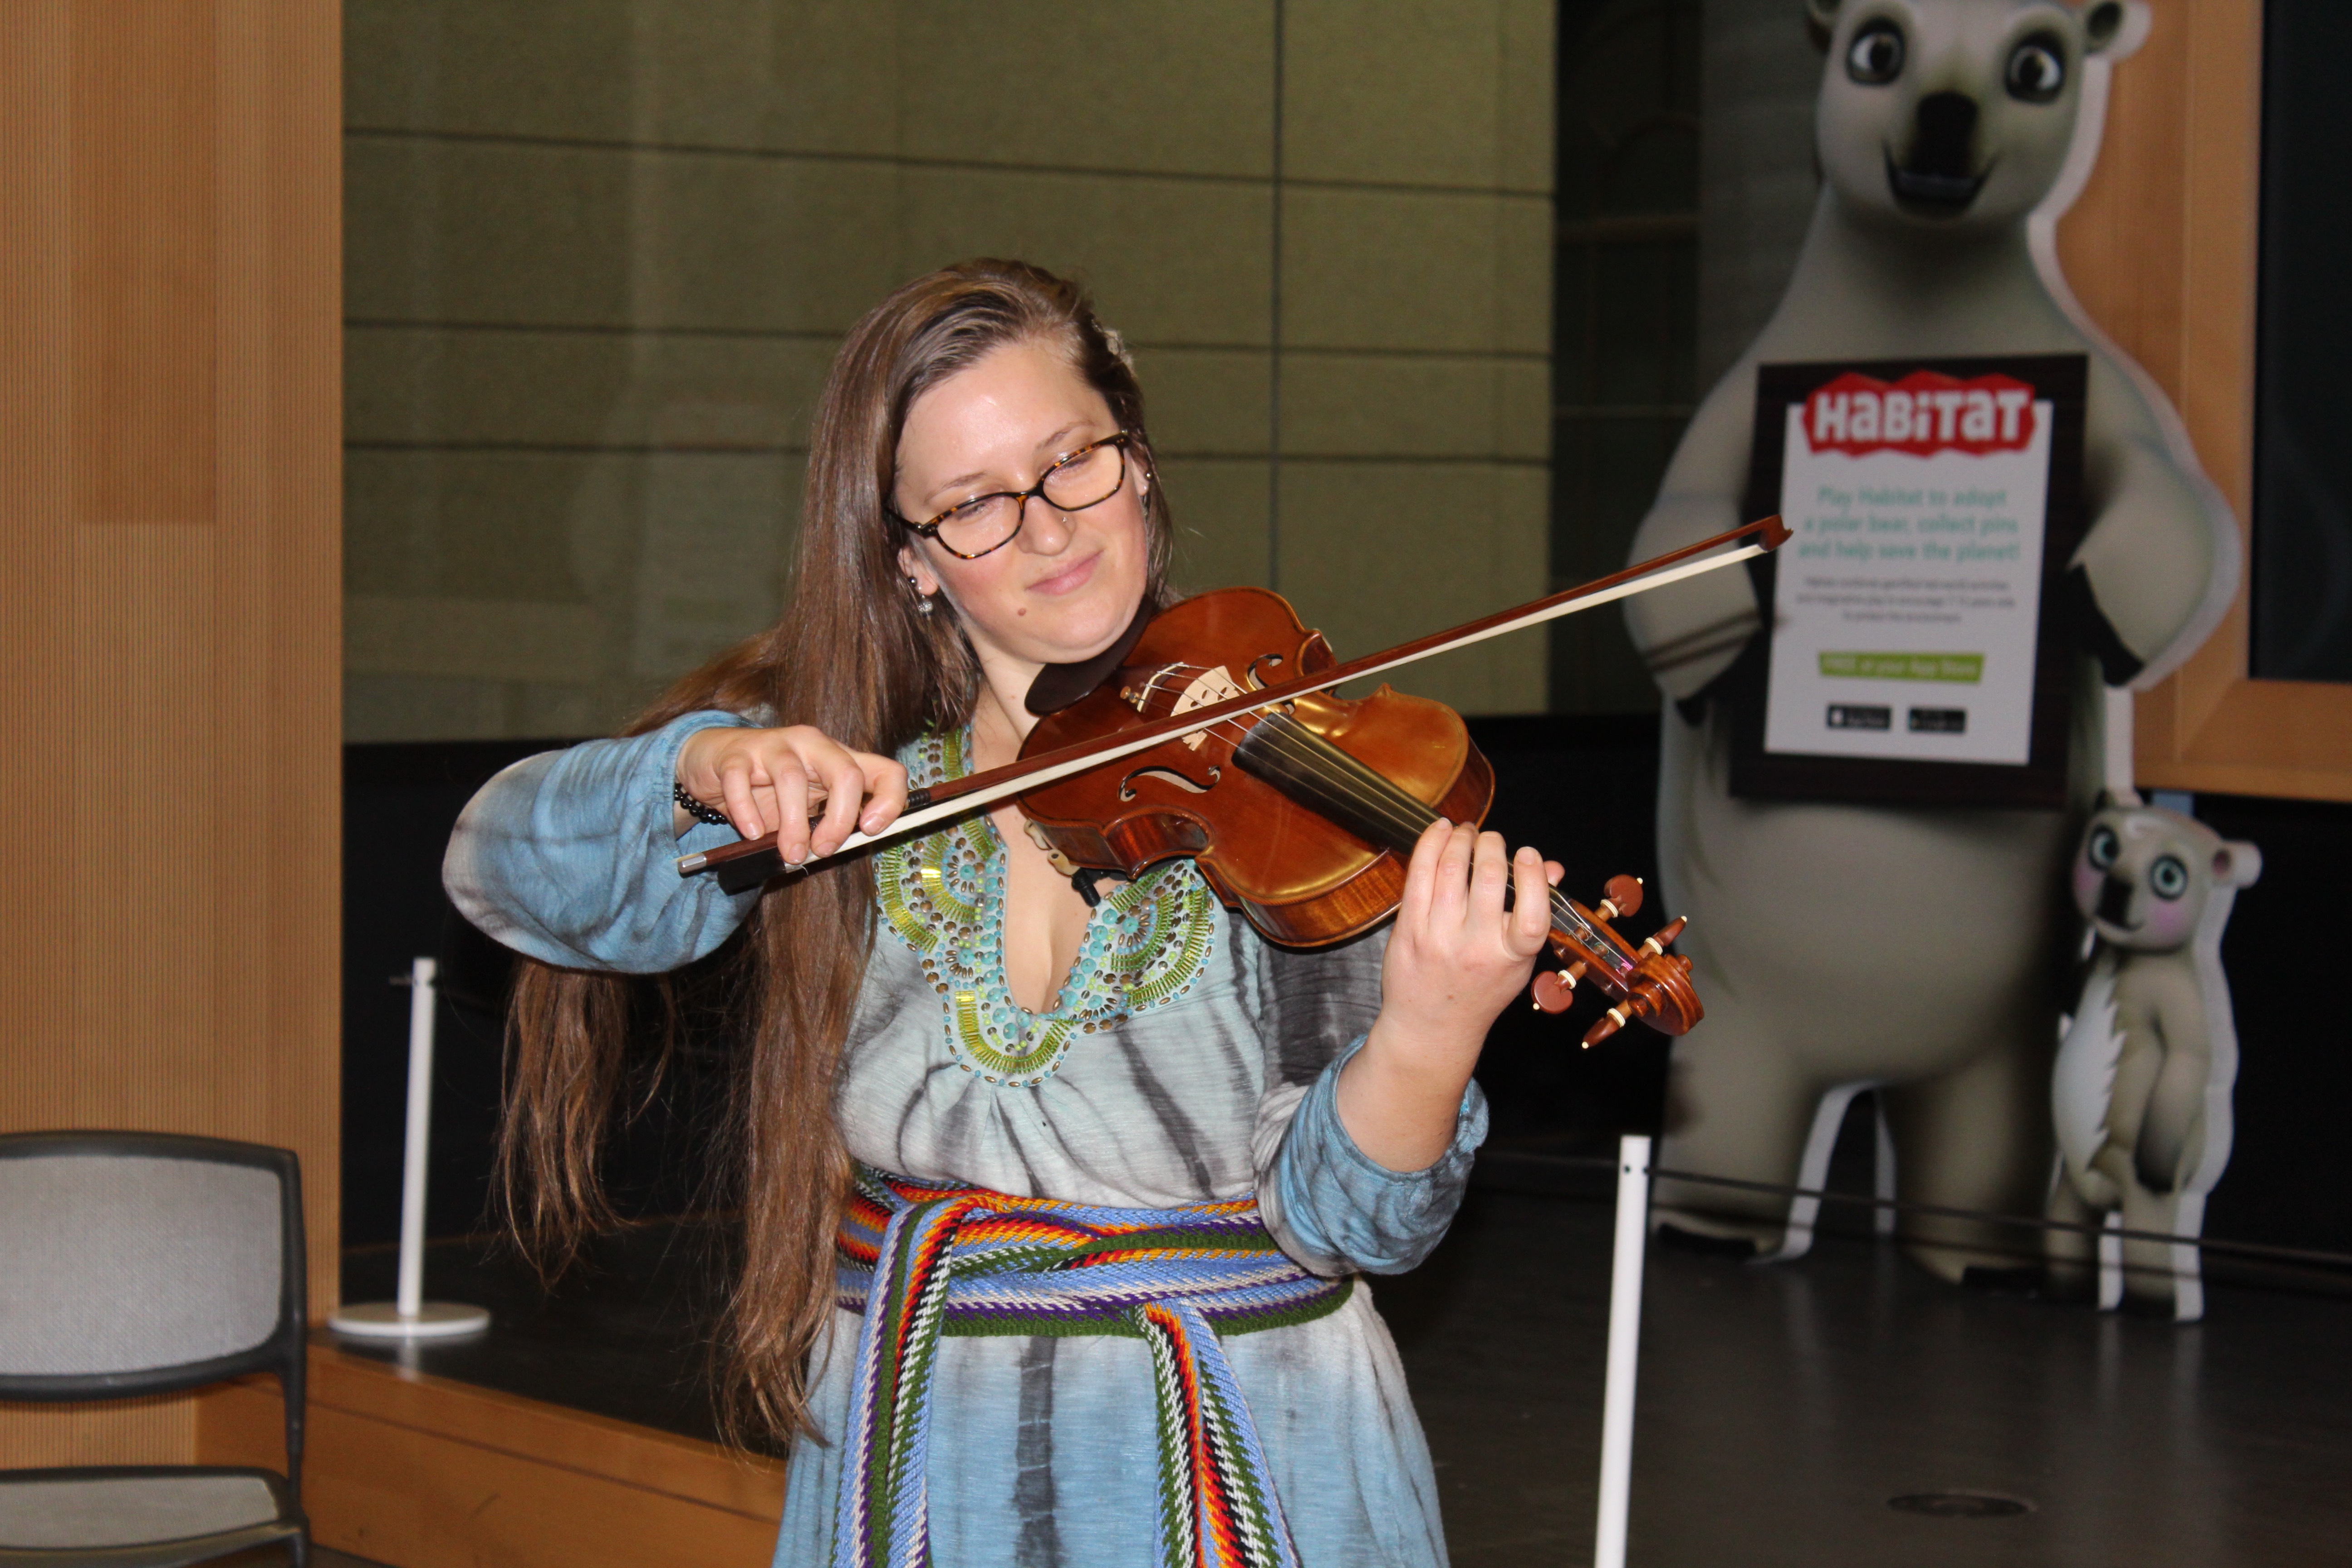 A woman playing the fiddle